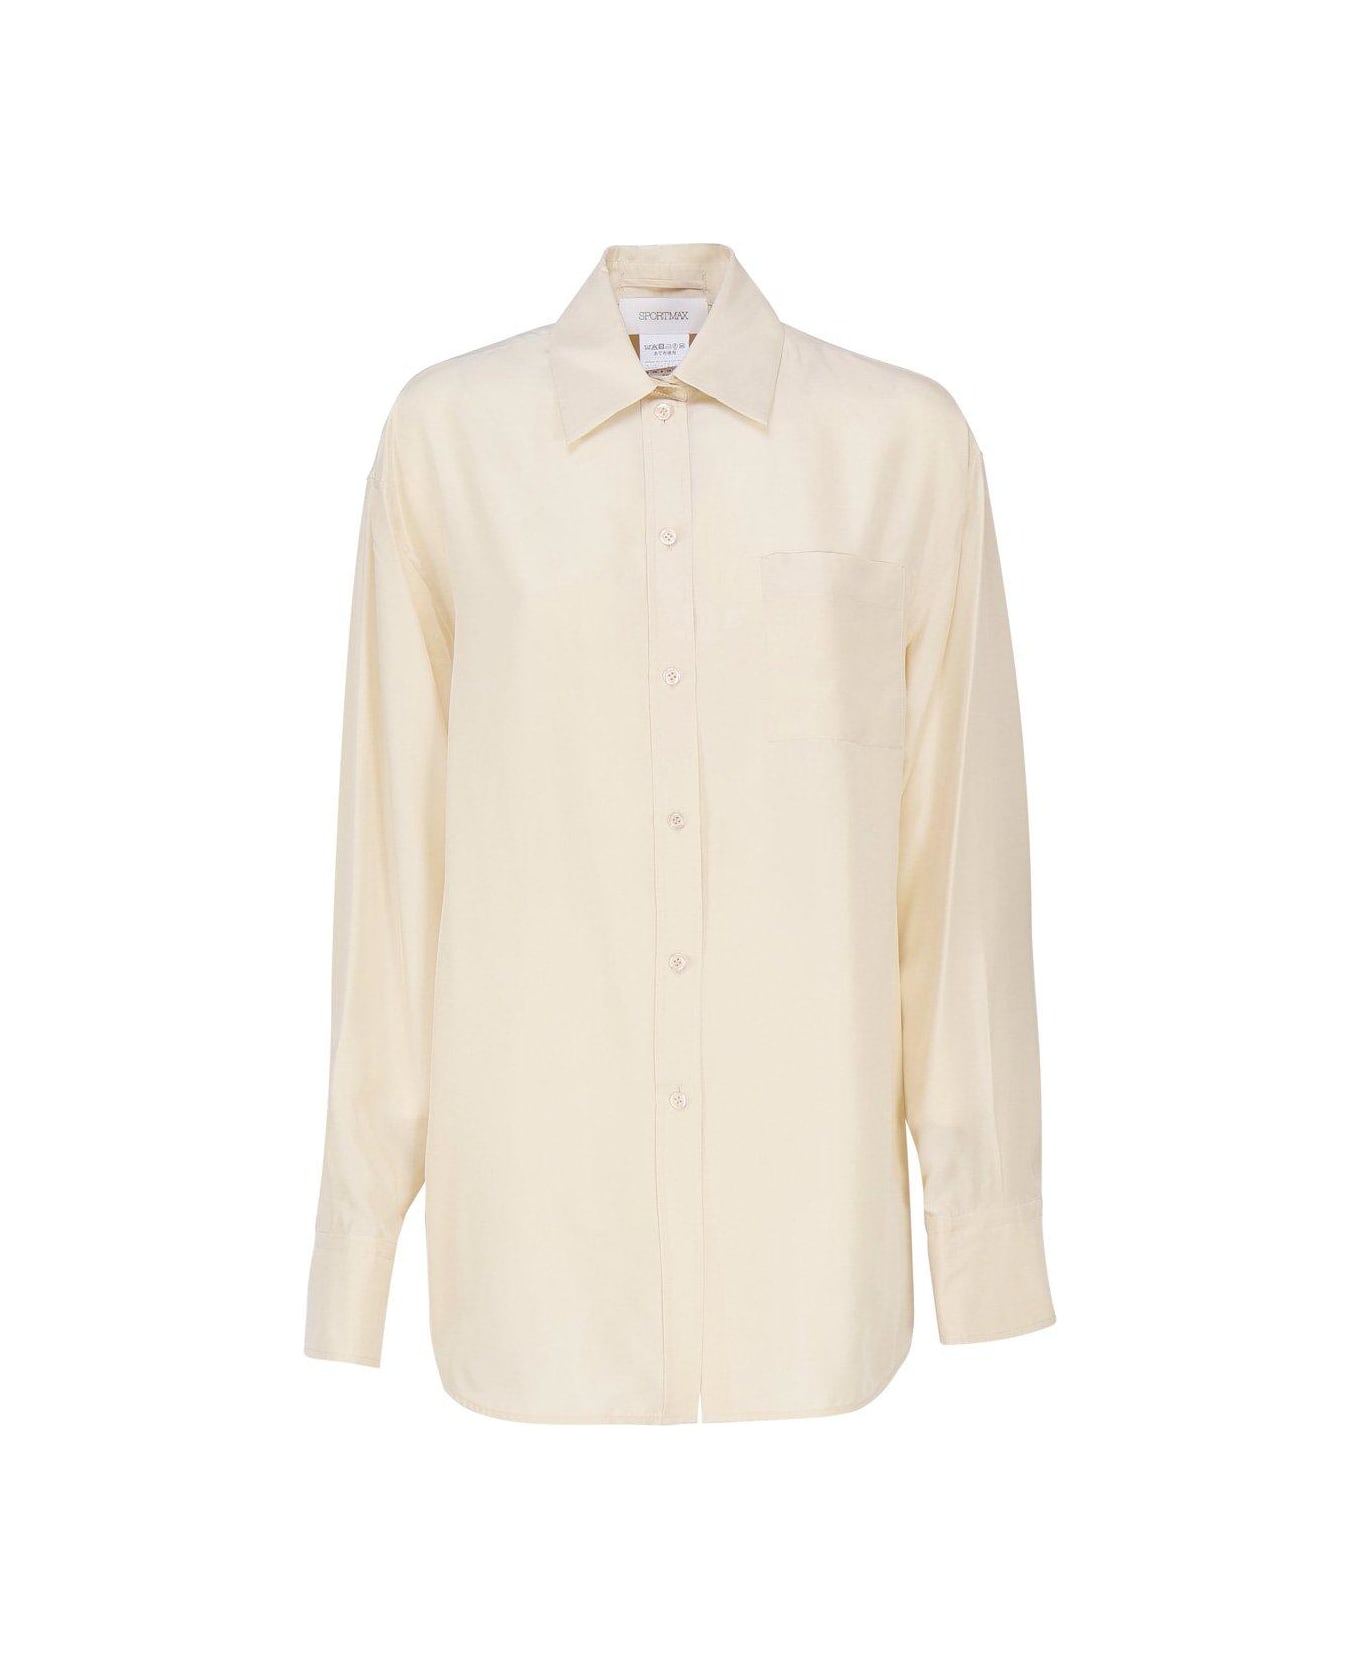 SportMax Buttoned Long-sleeved Shirt - Ivory